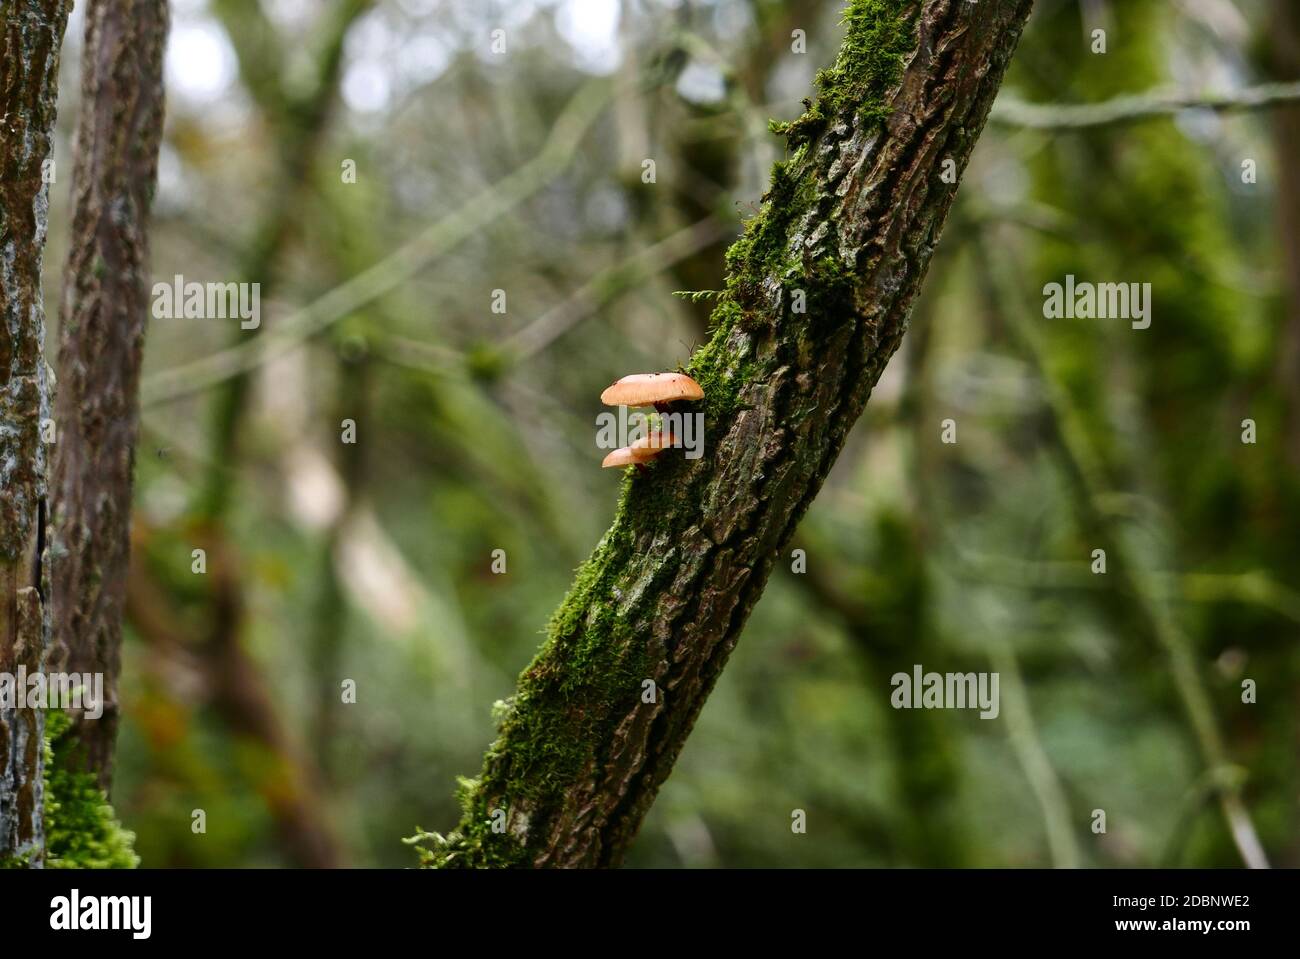 Two mushrooms (Lichen Agaric) growing on a moss/ lichen covered tree trunk in a forest in Cambridgeshire, UK. Stock Photo